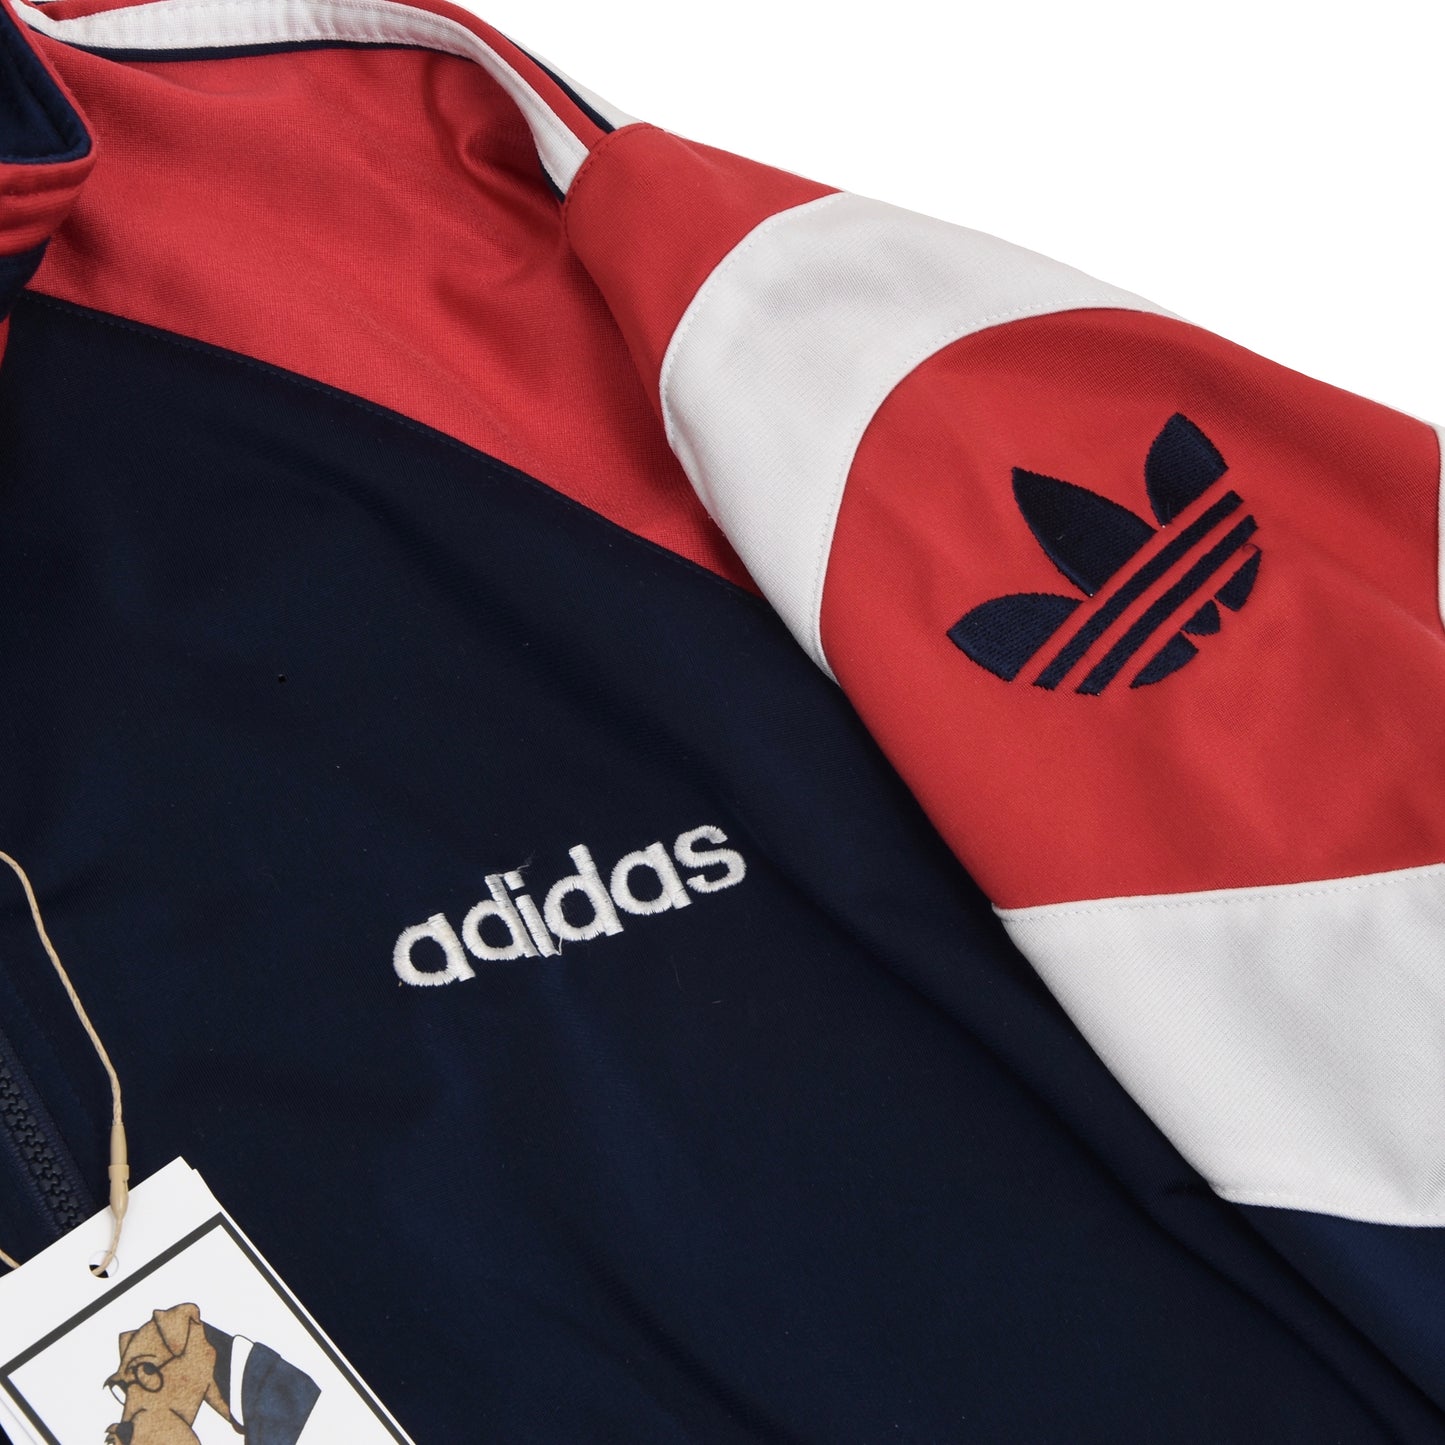 Vintage '90s Adidas Track Suit Size D7 - Red, White, Navy